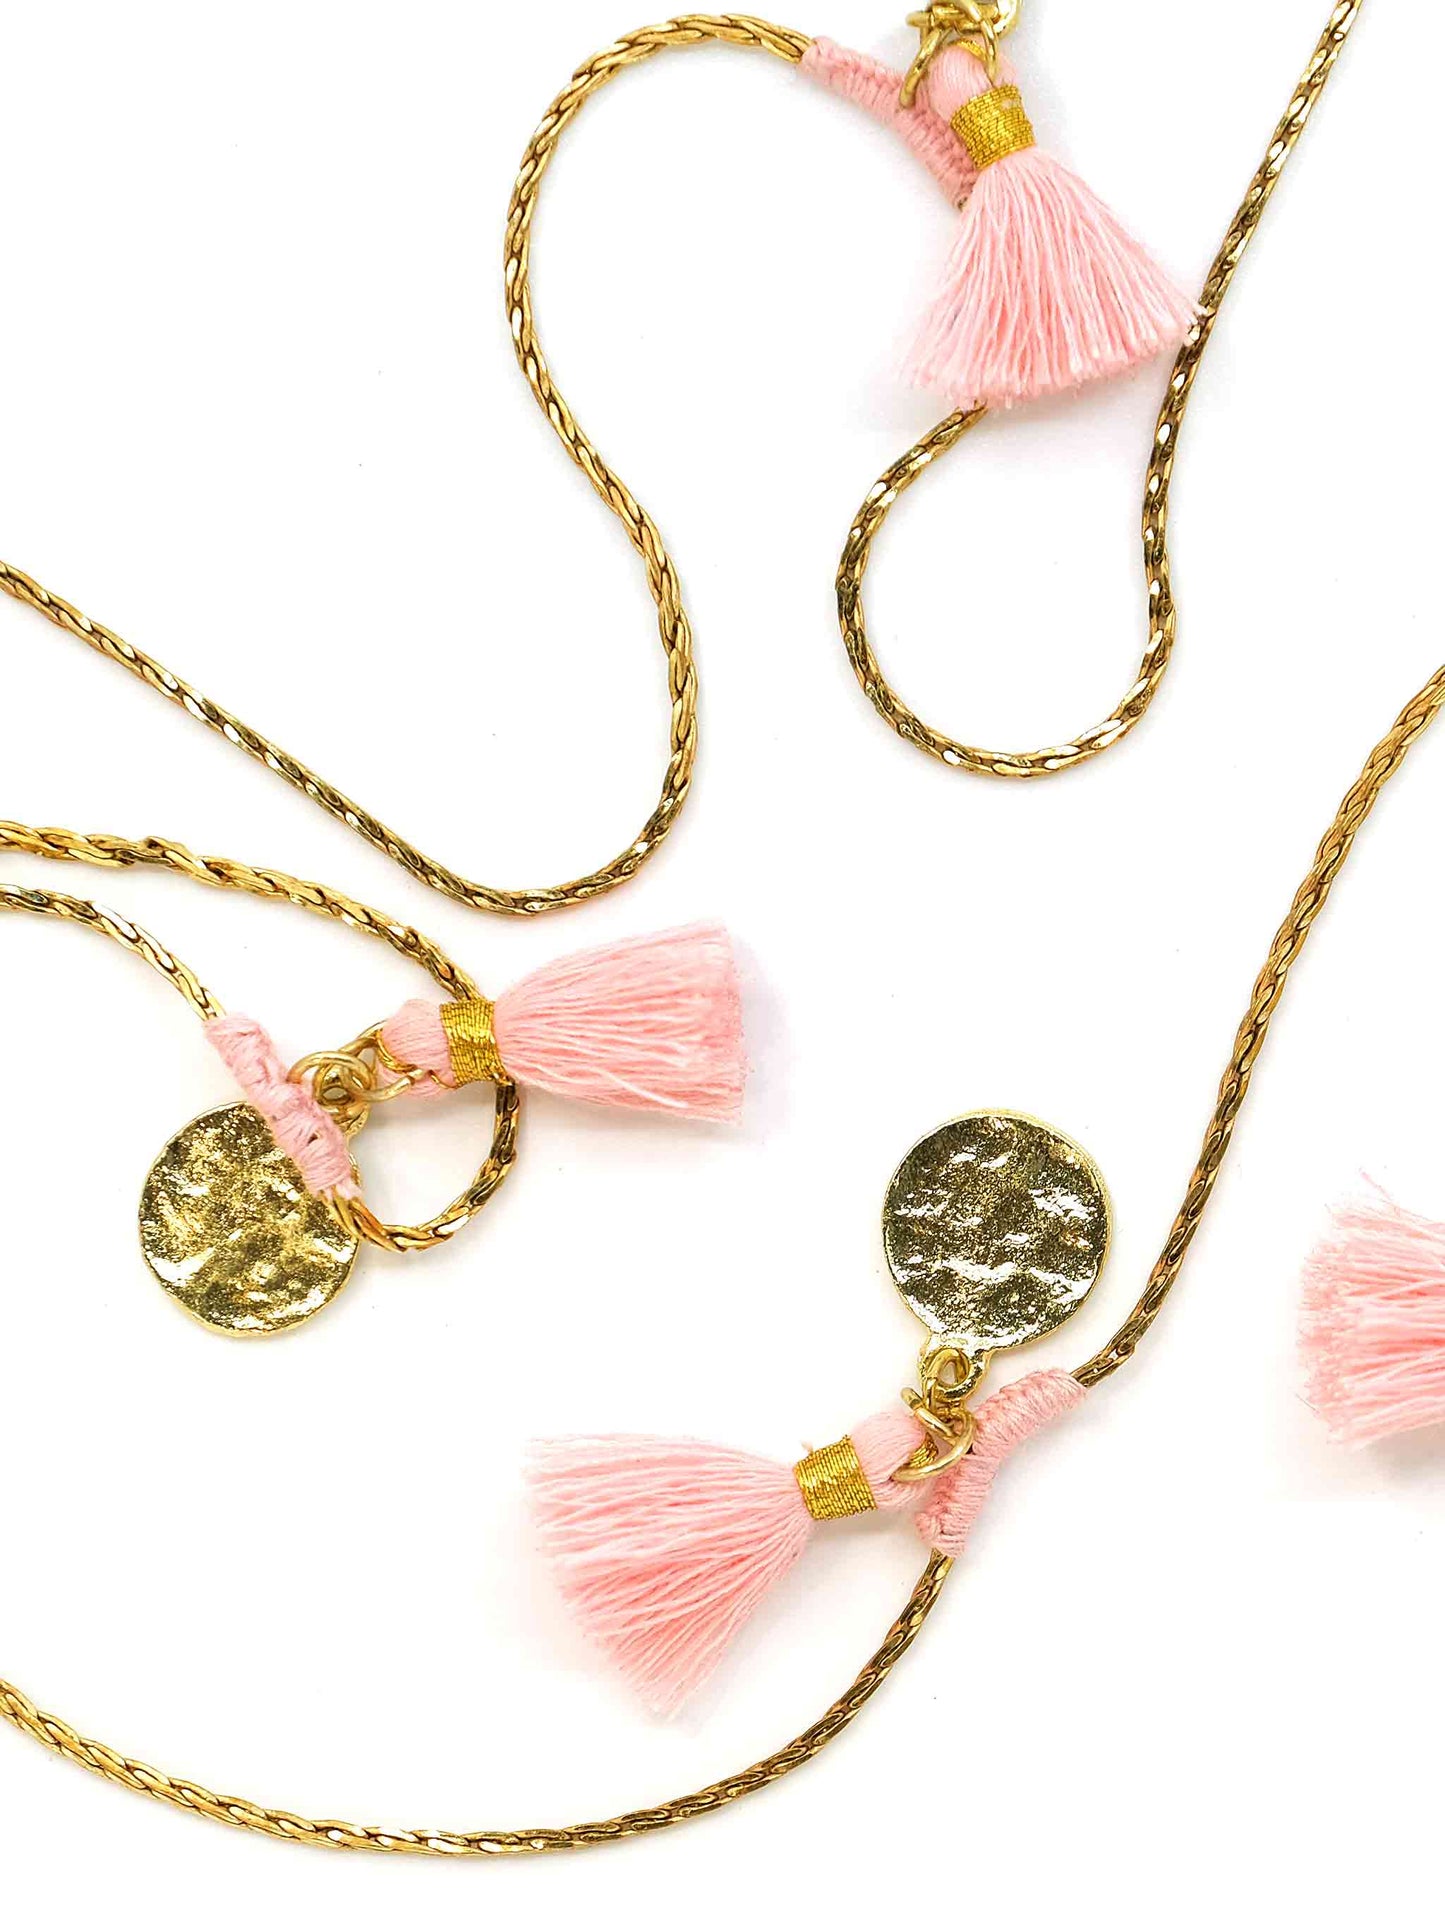 Bohemian Forever Fringe Gold Long Necklace with Candy Pink Tassels